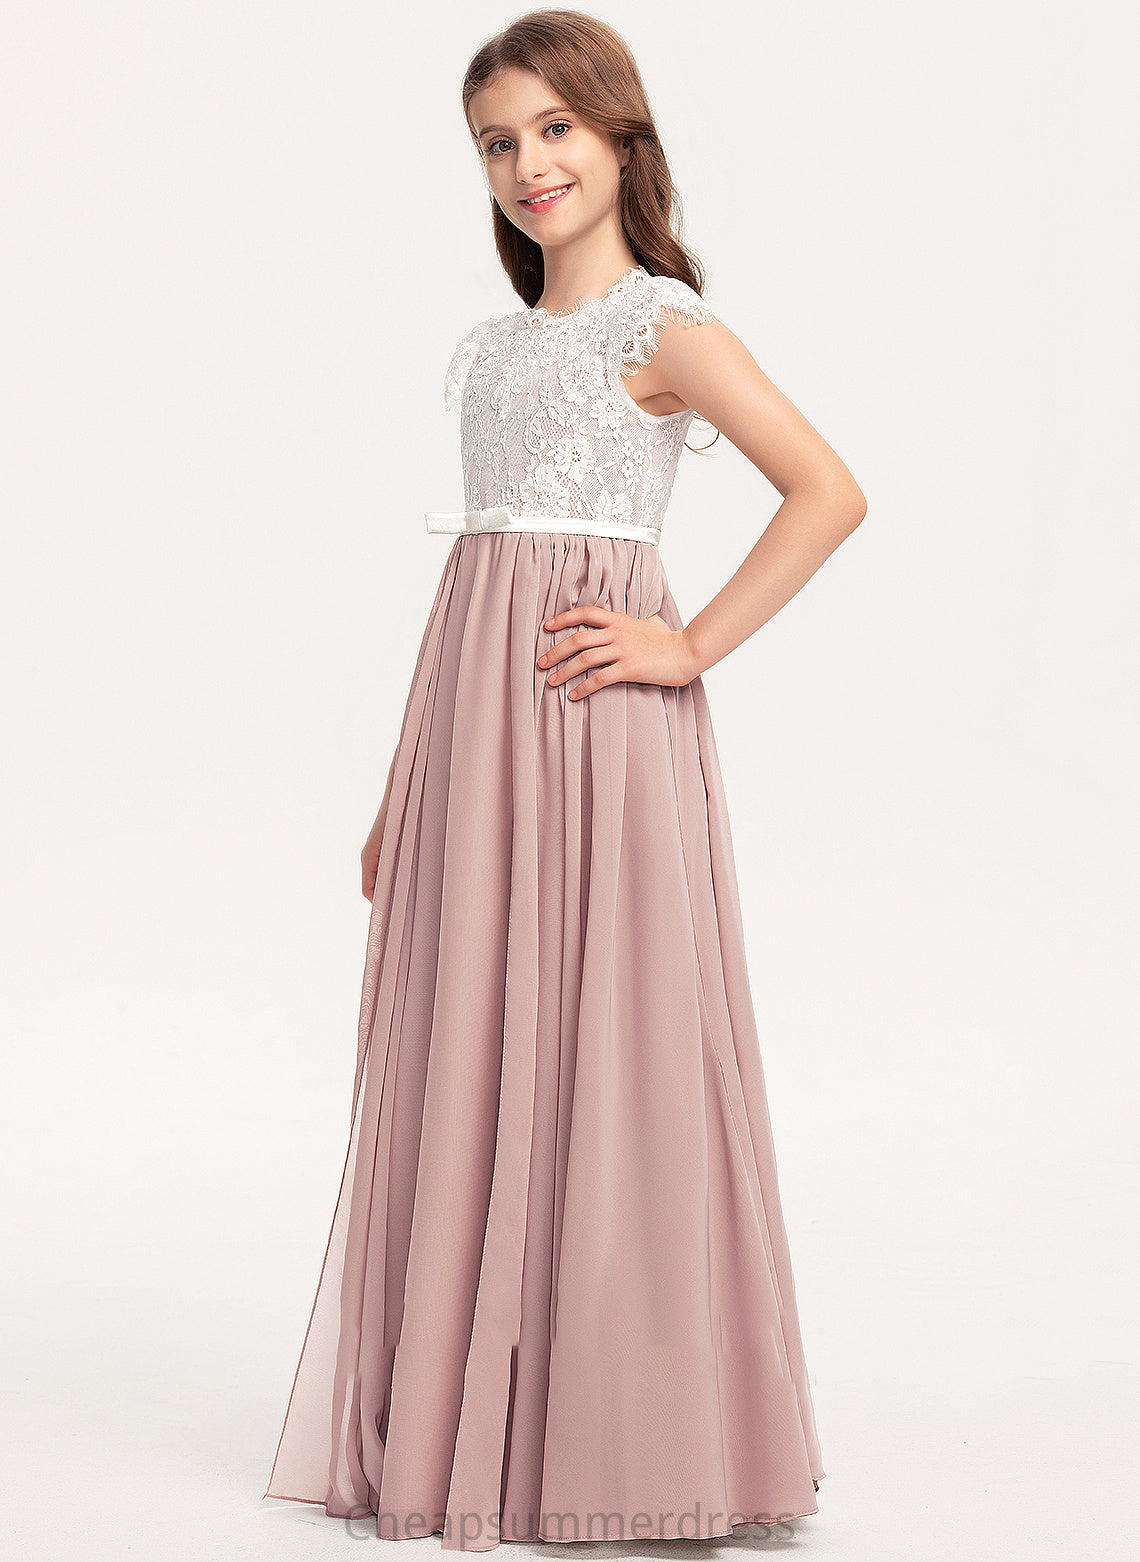 Kinley With Scoop A-Line Neck Lace Bow(s) Floor-Length Junior Bridesmaid Dresses Chiffon